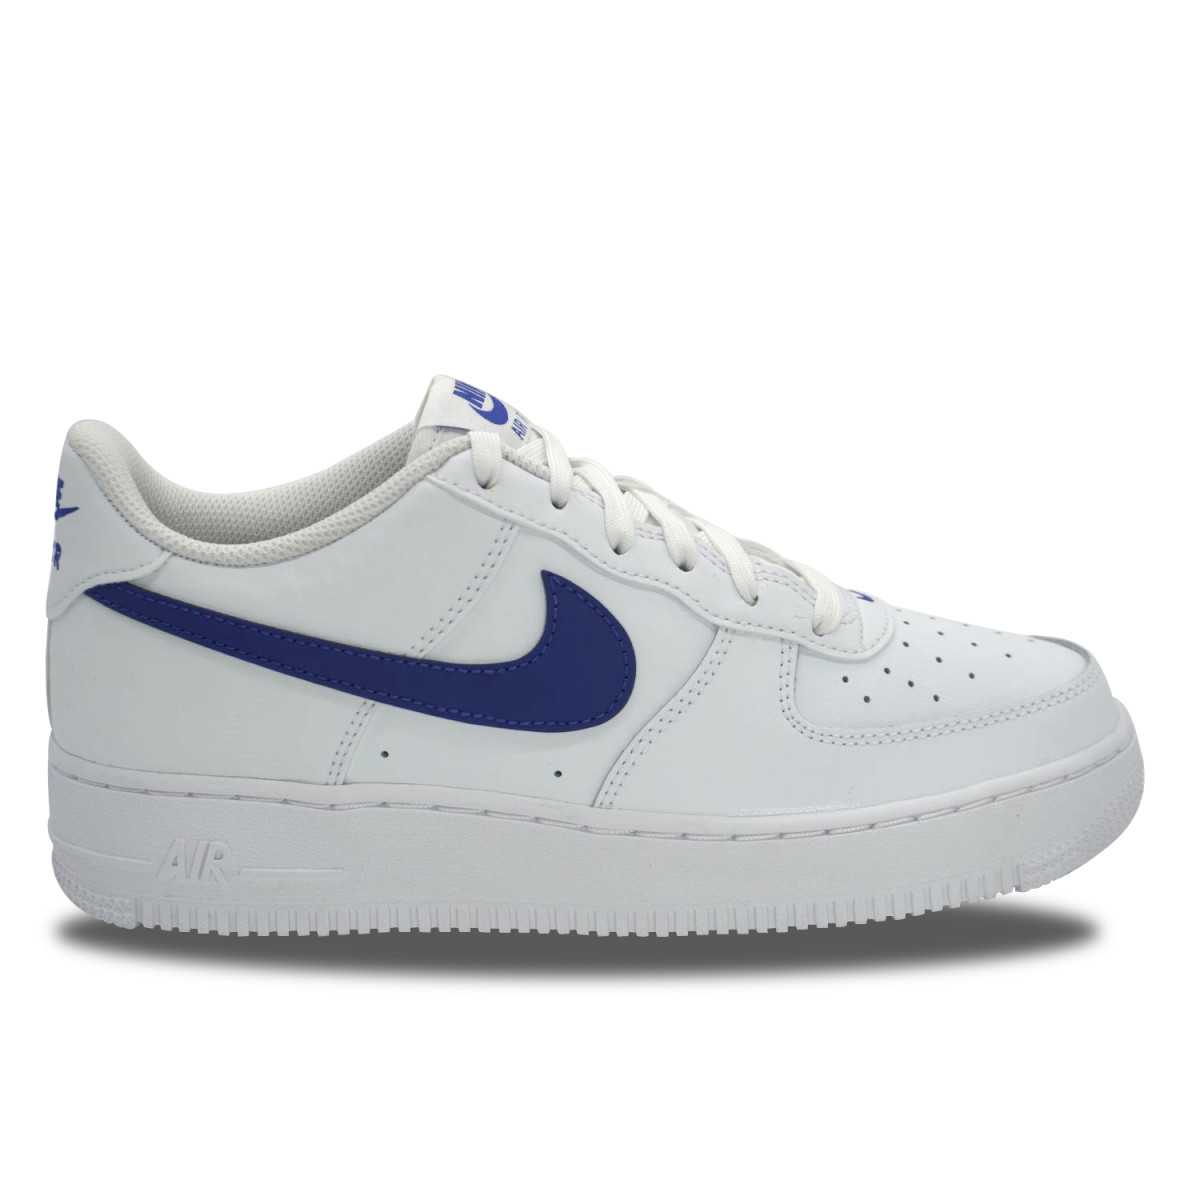 Nike Air Force 1 Leather White Hyper Royal